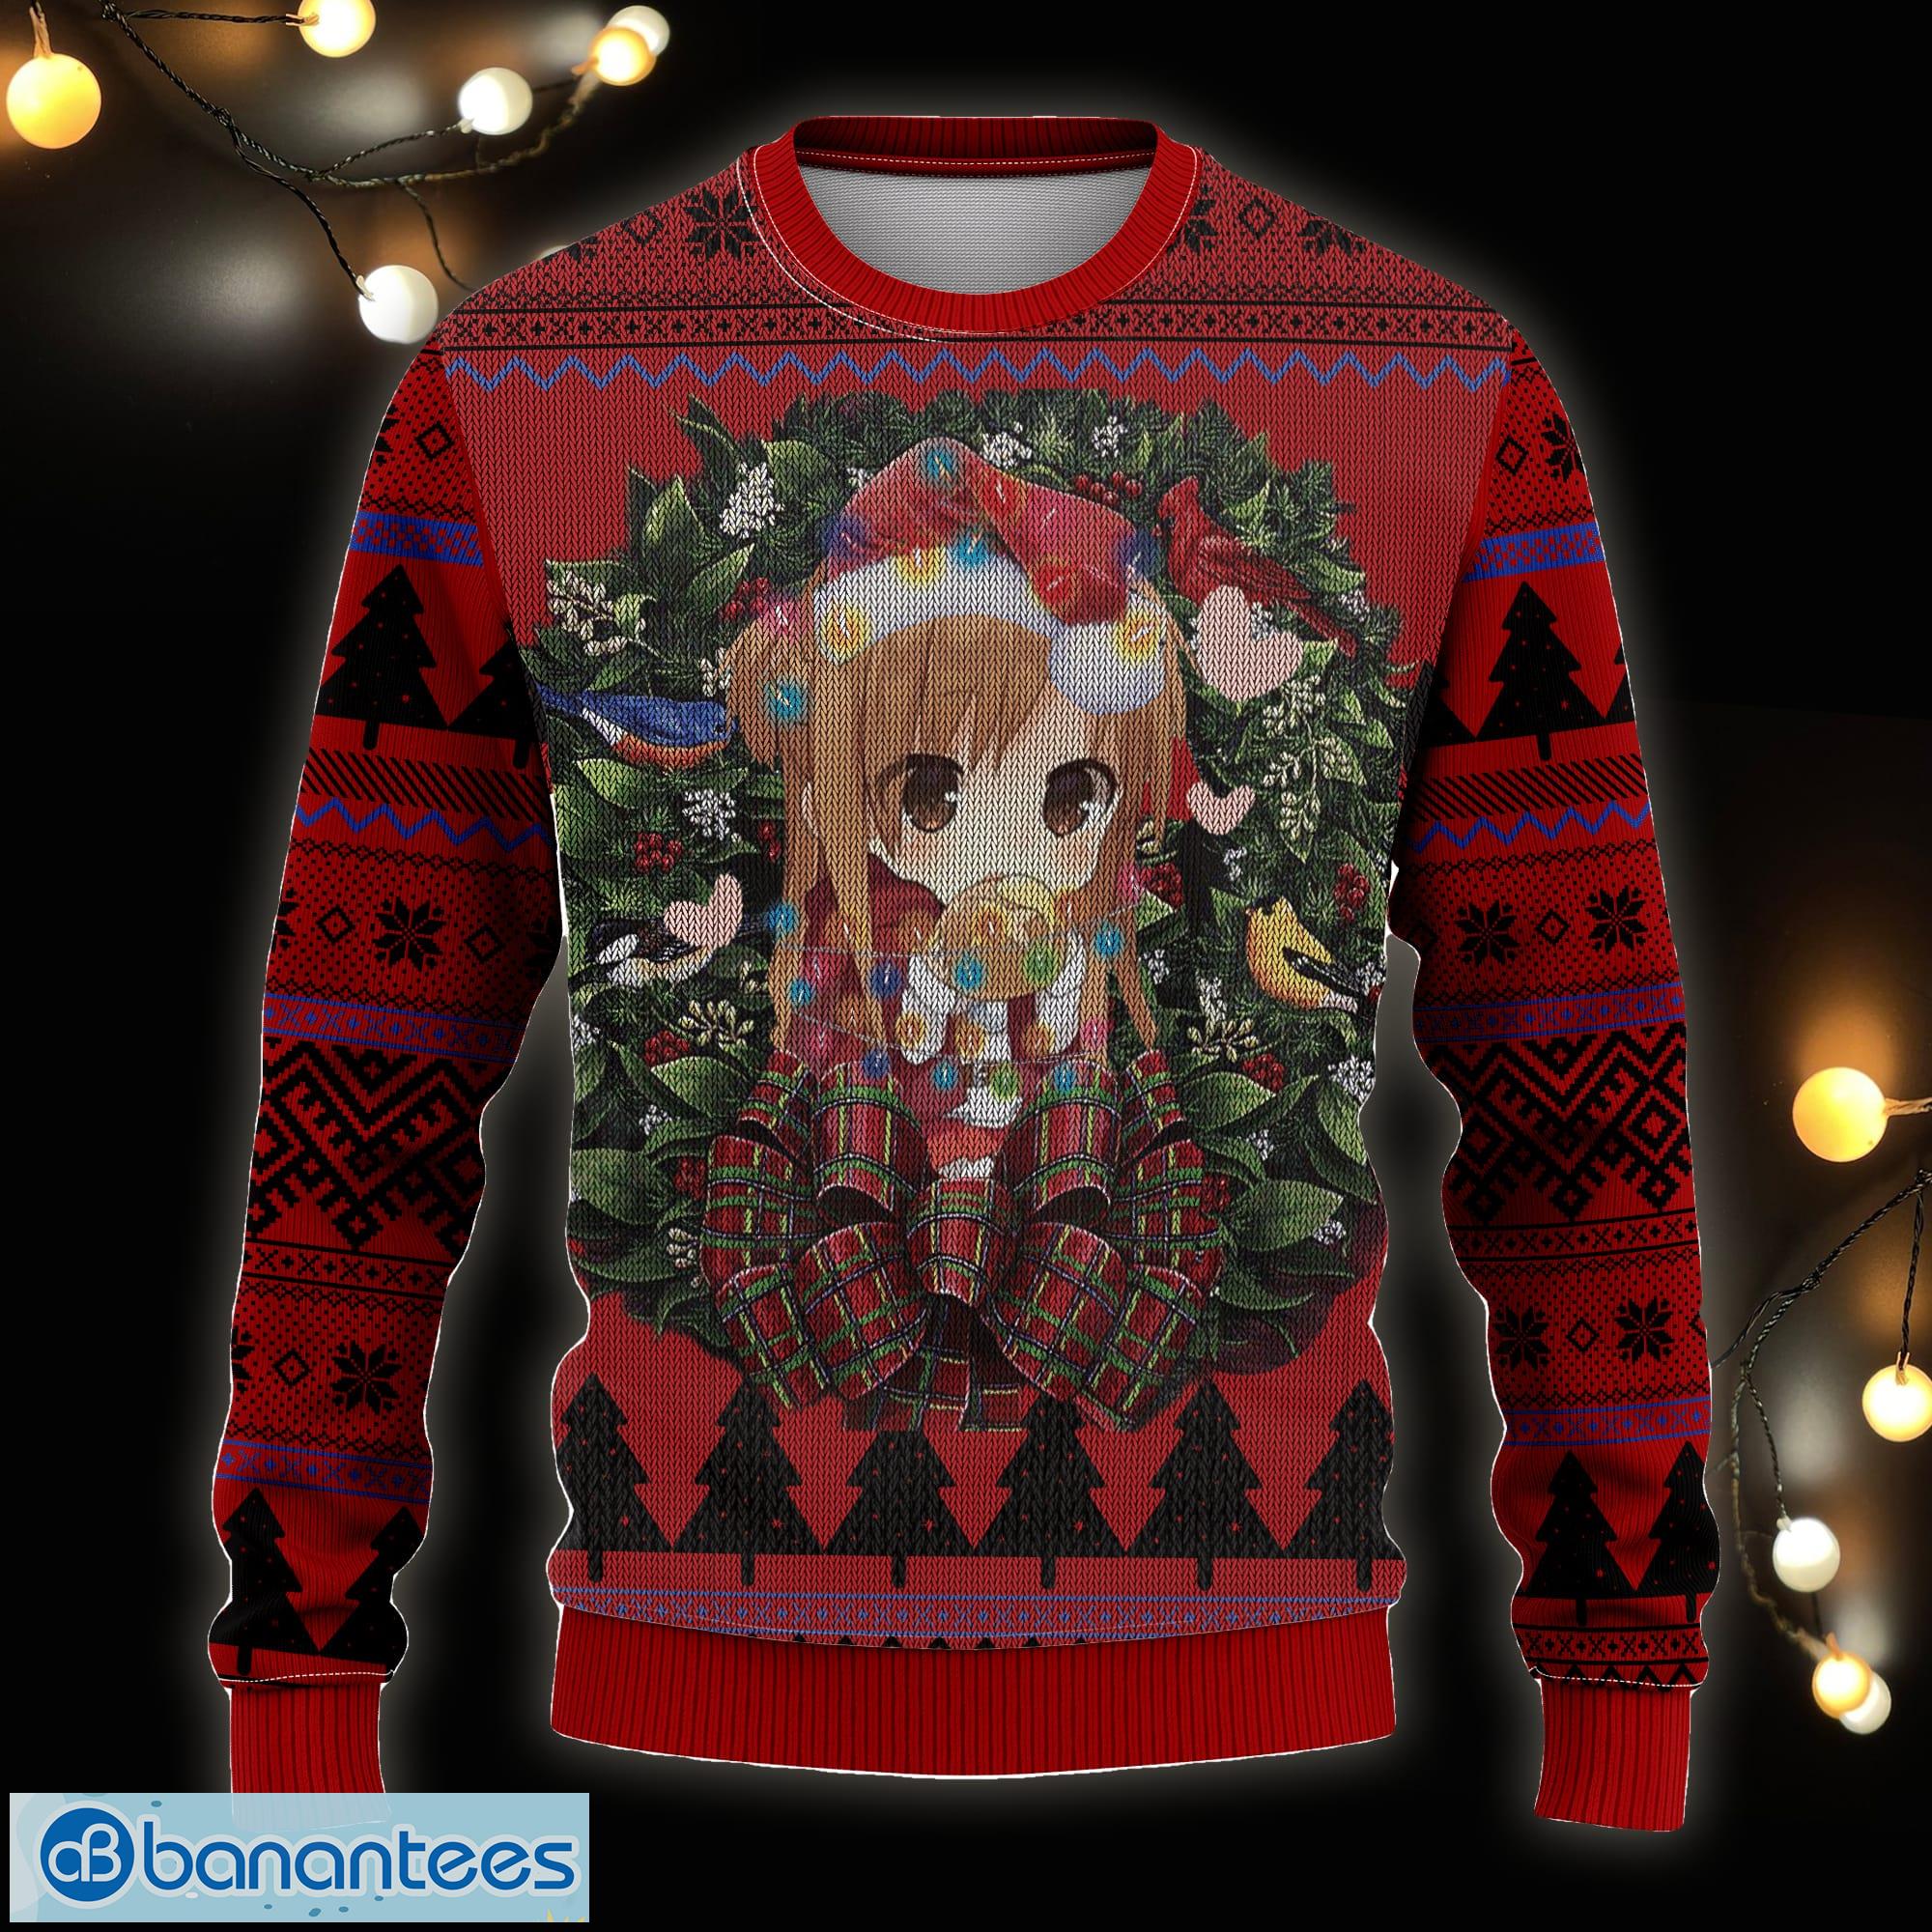 Asta Uniform Ugly Christmas Sweater Black Clover Gift Anime For Men And  Women - Shibtee Clothing